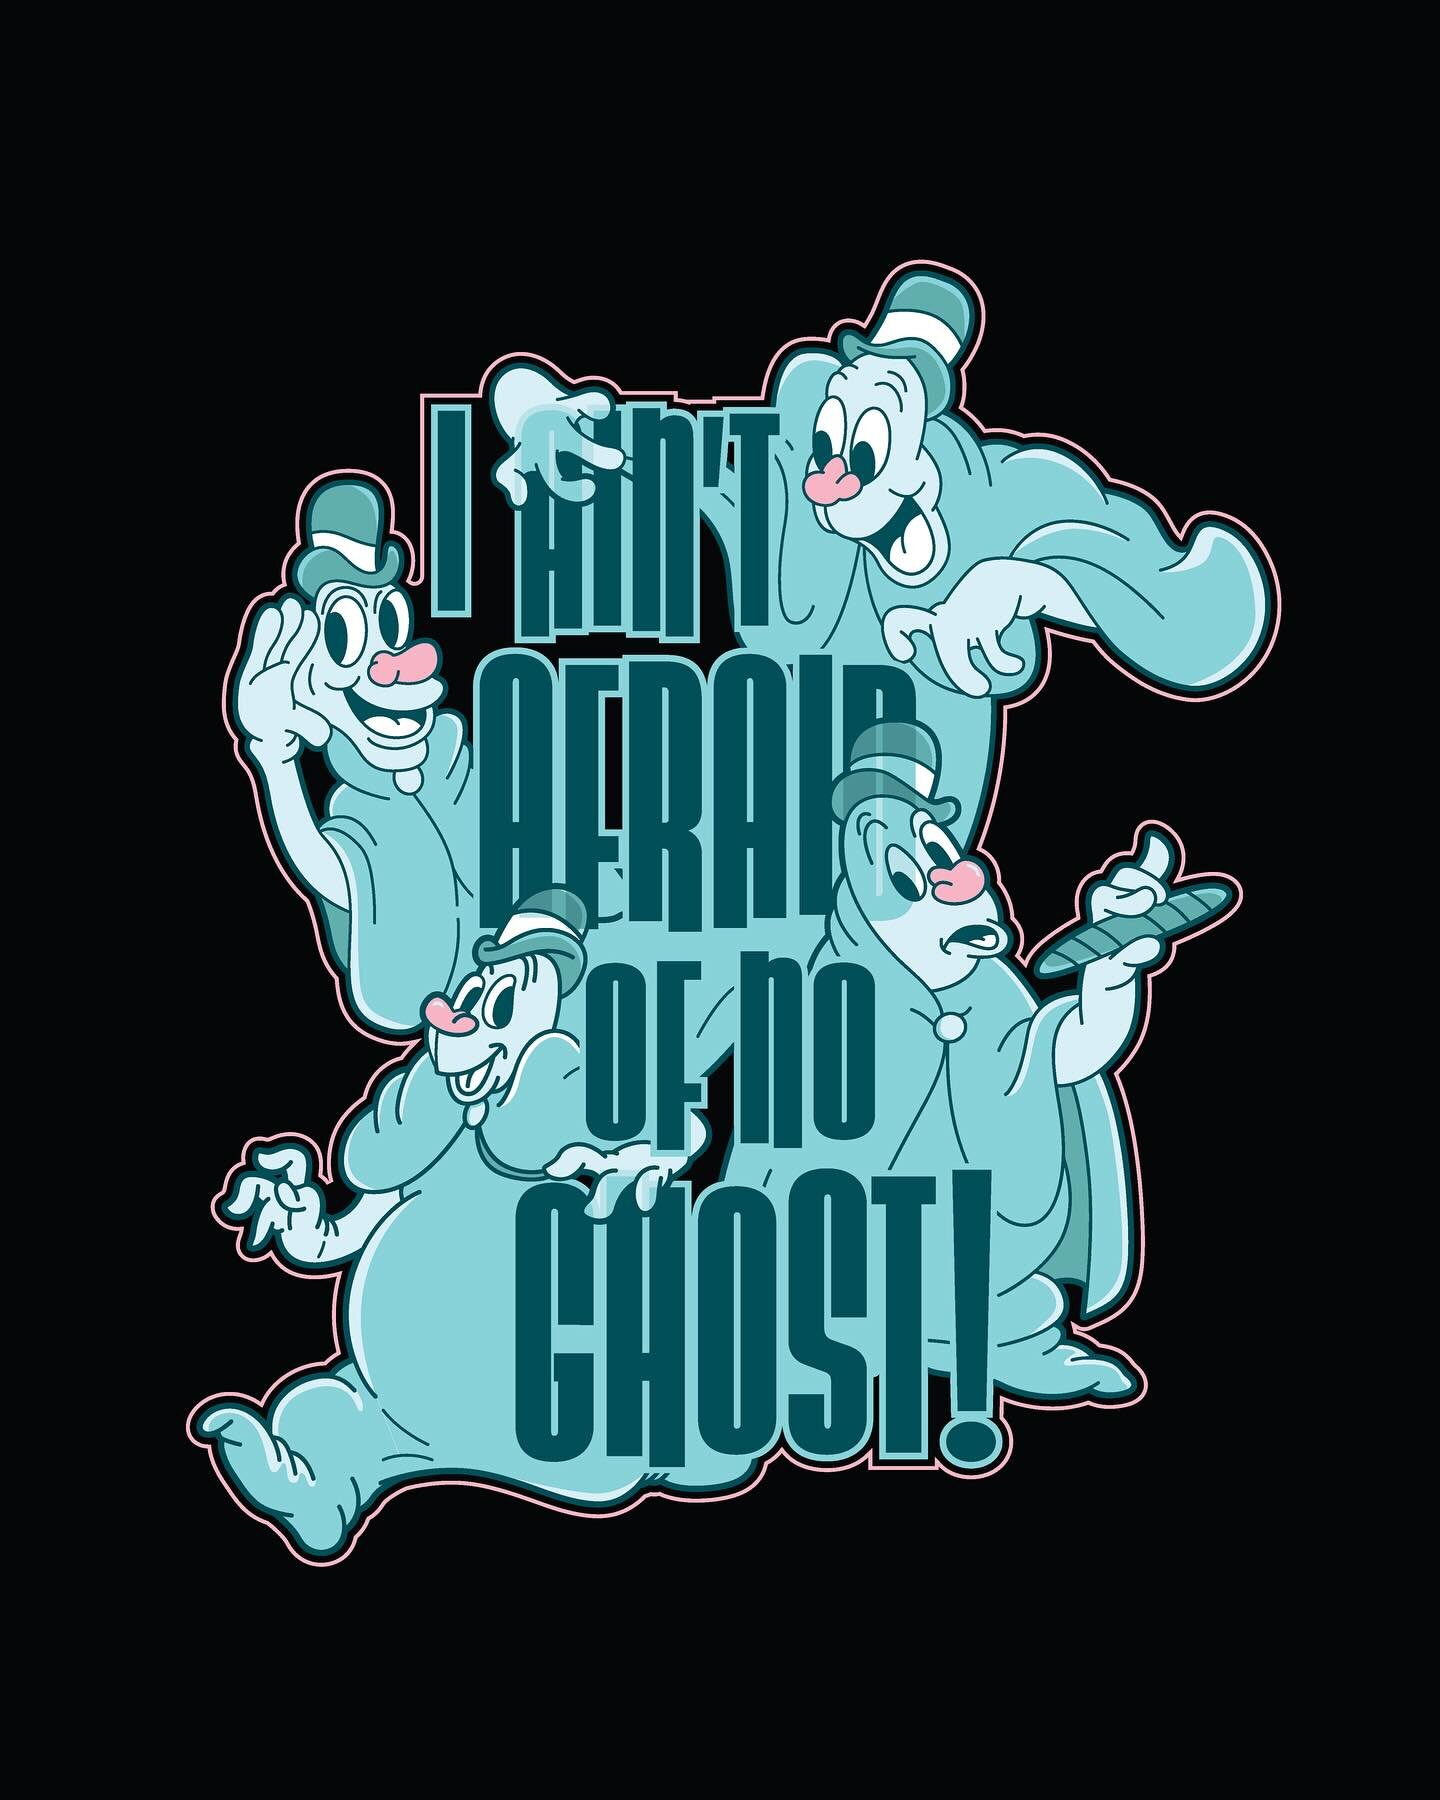 Super fun piece I did inspired by the #lonsesomeghosts for @foolishmortalgraveyard love playing with vintage style ghosties!
.
#vintagedisney #fmsco #foolishmortalsupplyco #vectorartist